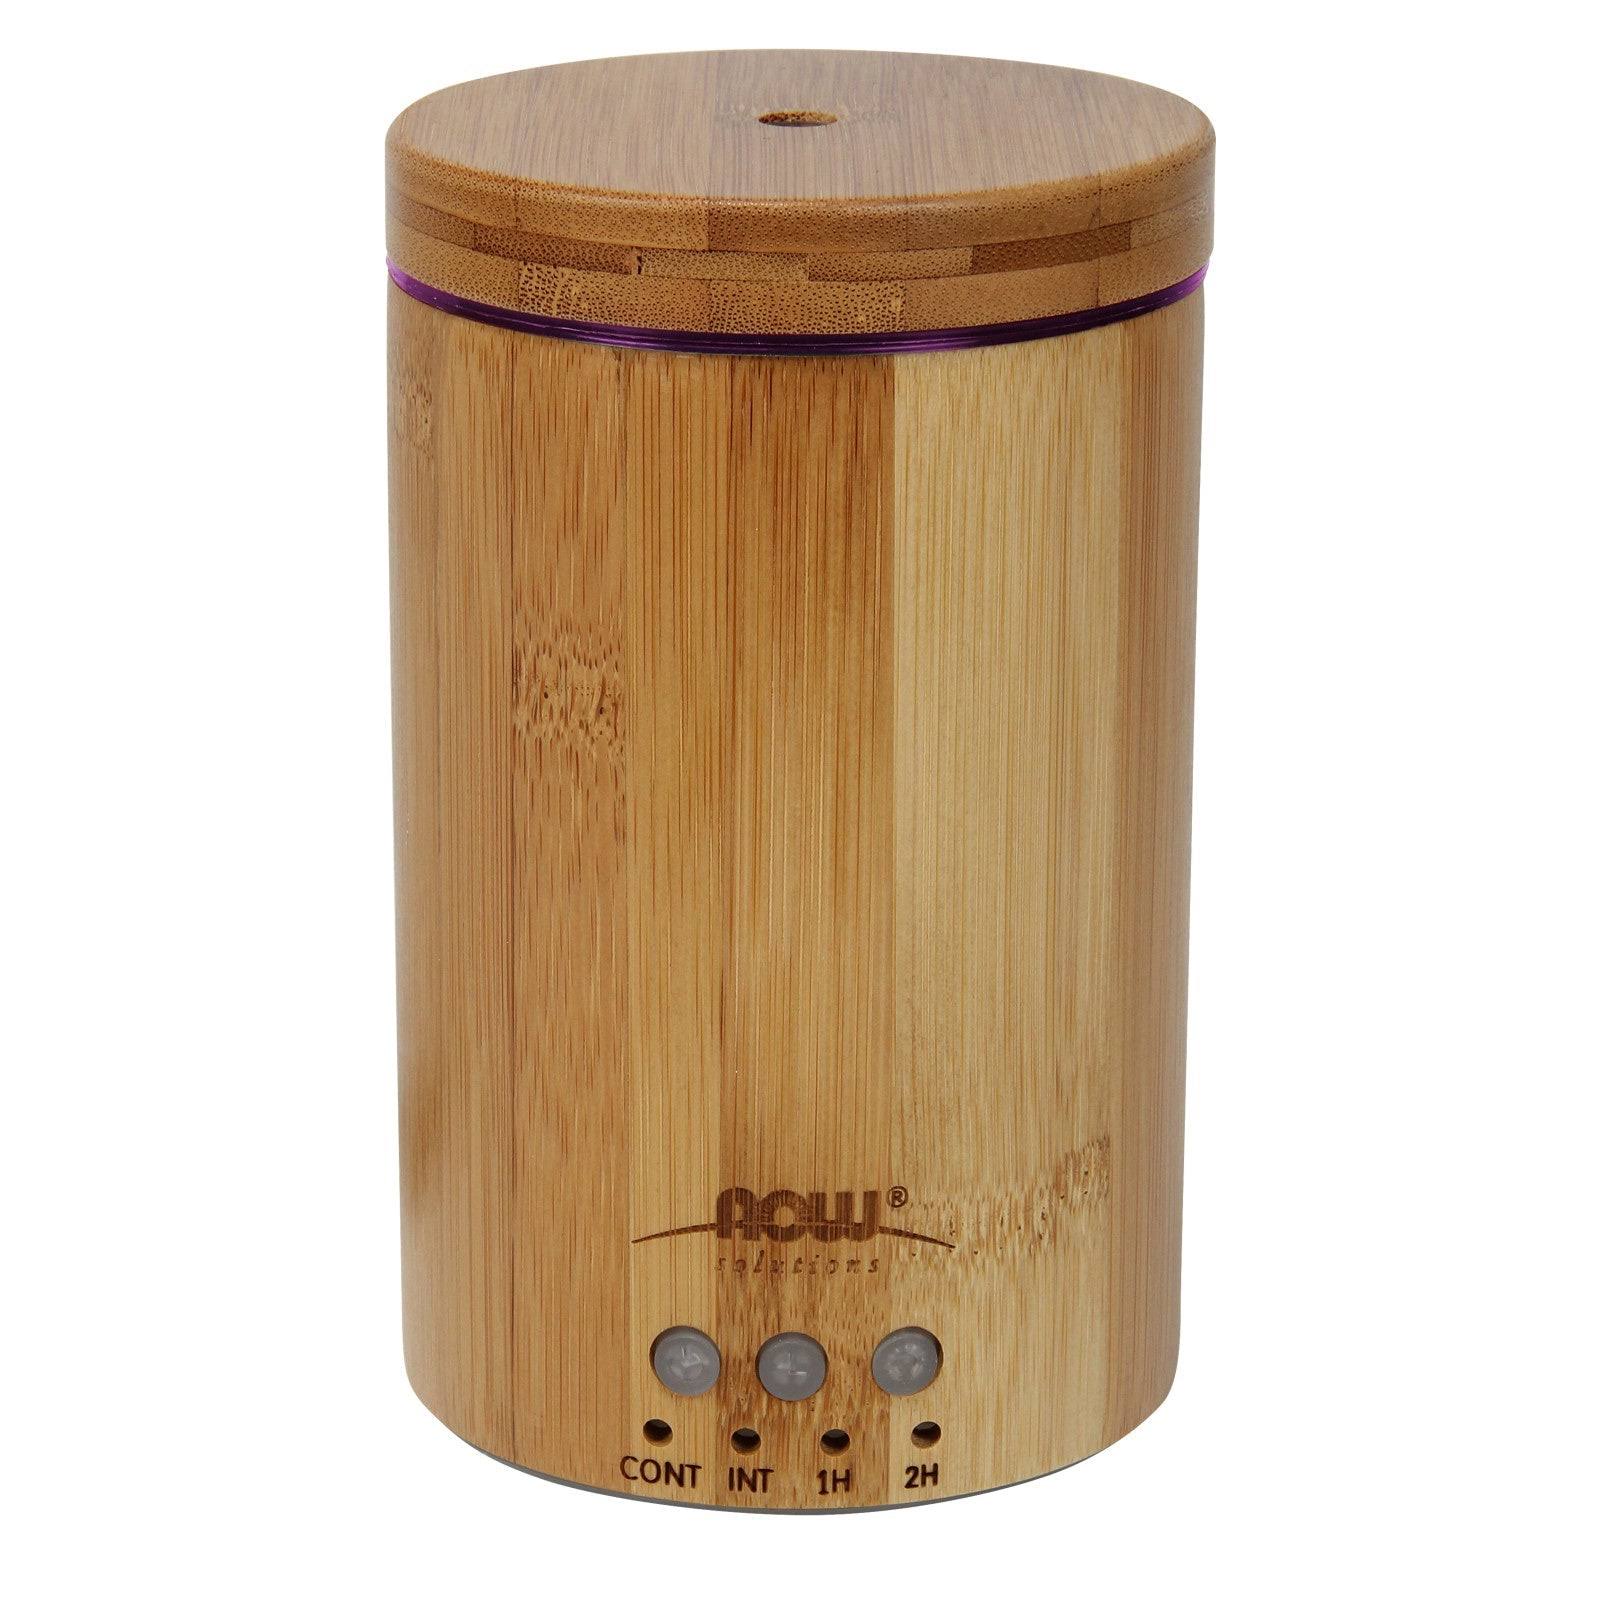 Now Foods Ultrasonic Real Bamboo Oil Diffuser